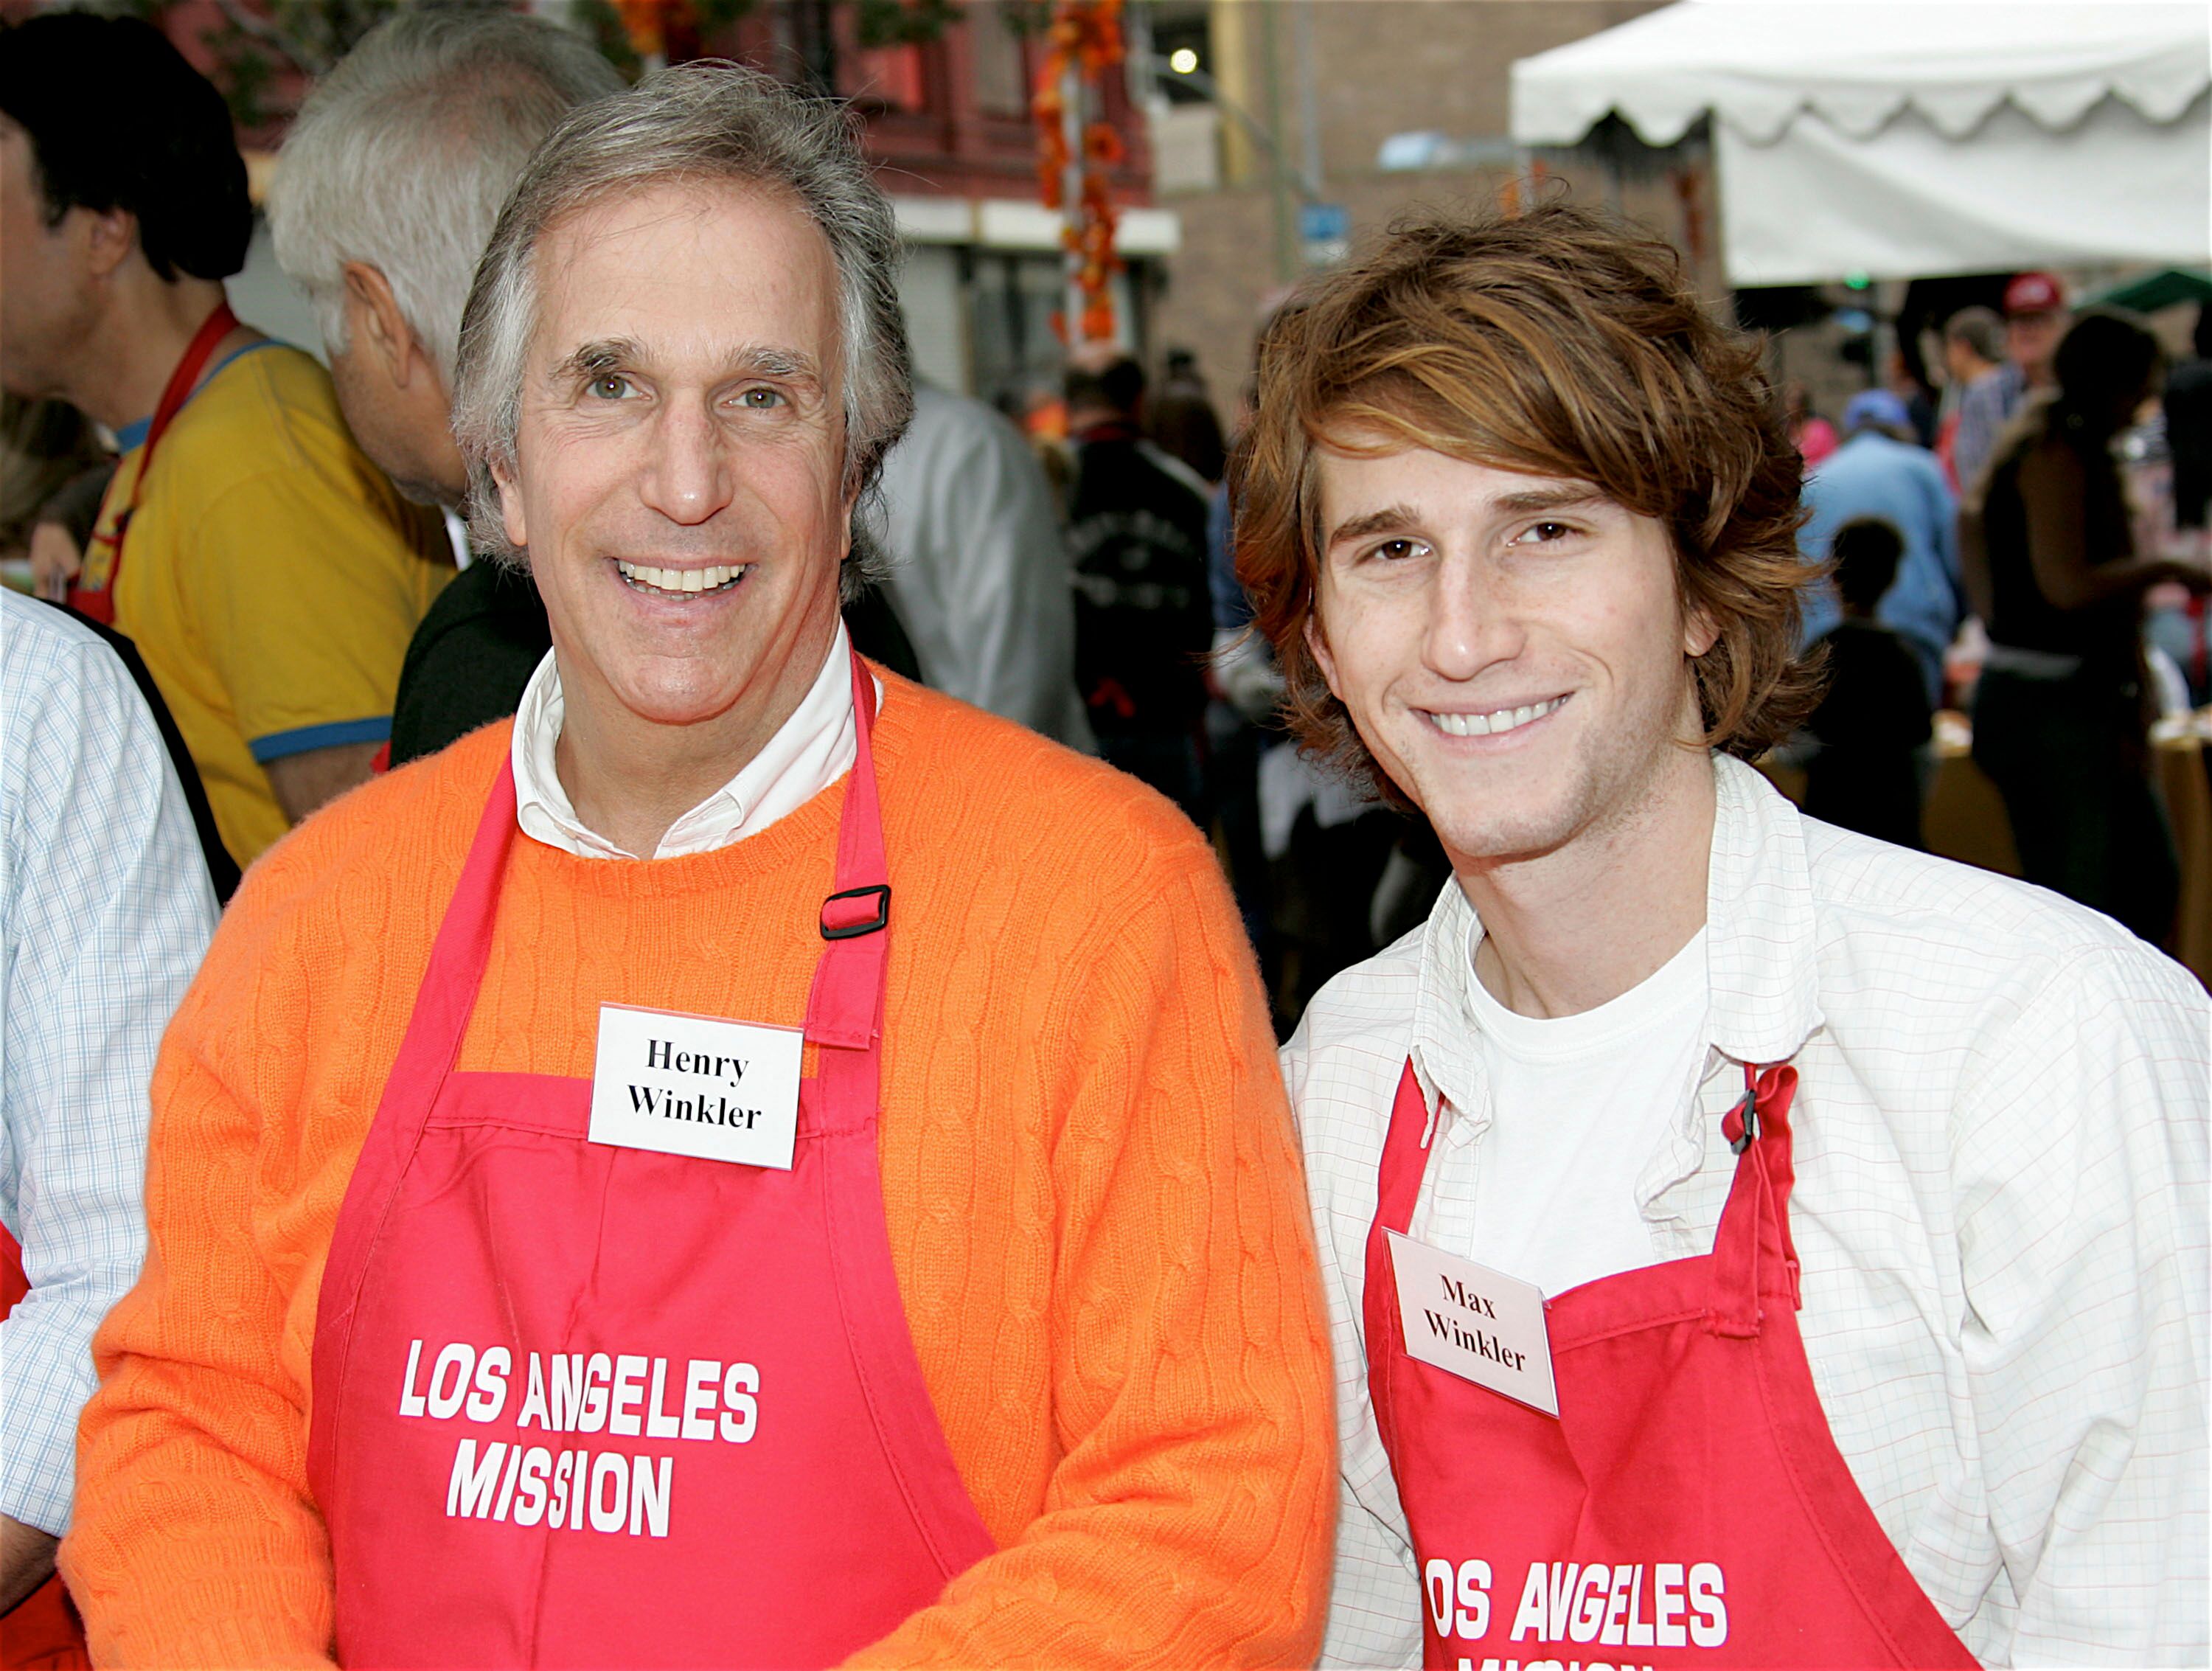 Henry Winkler and Max Winkler pose at the Los Angeles Mission Thanksgiving. | Source:Getty Images